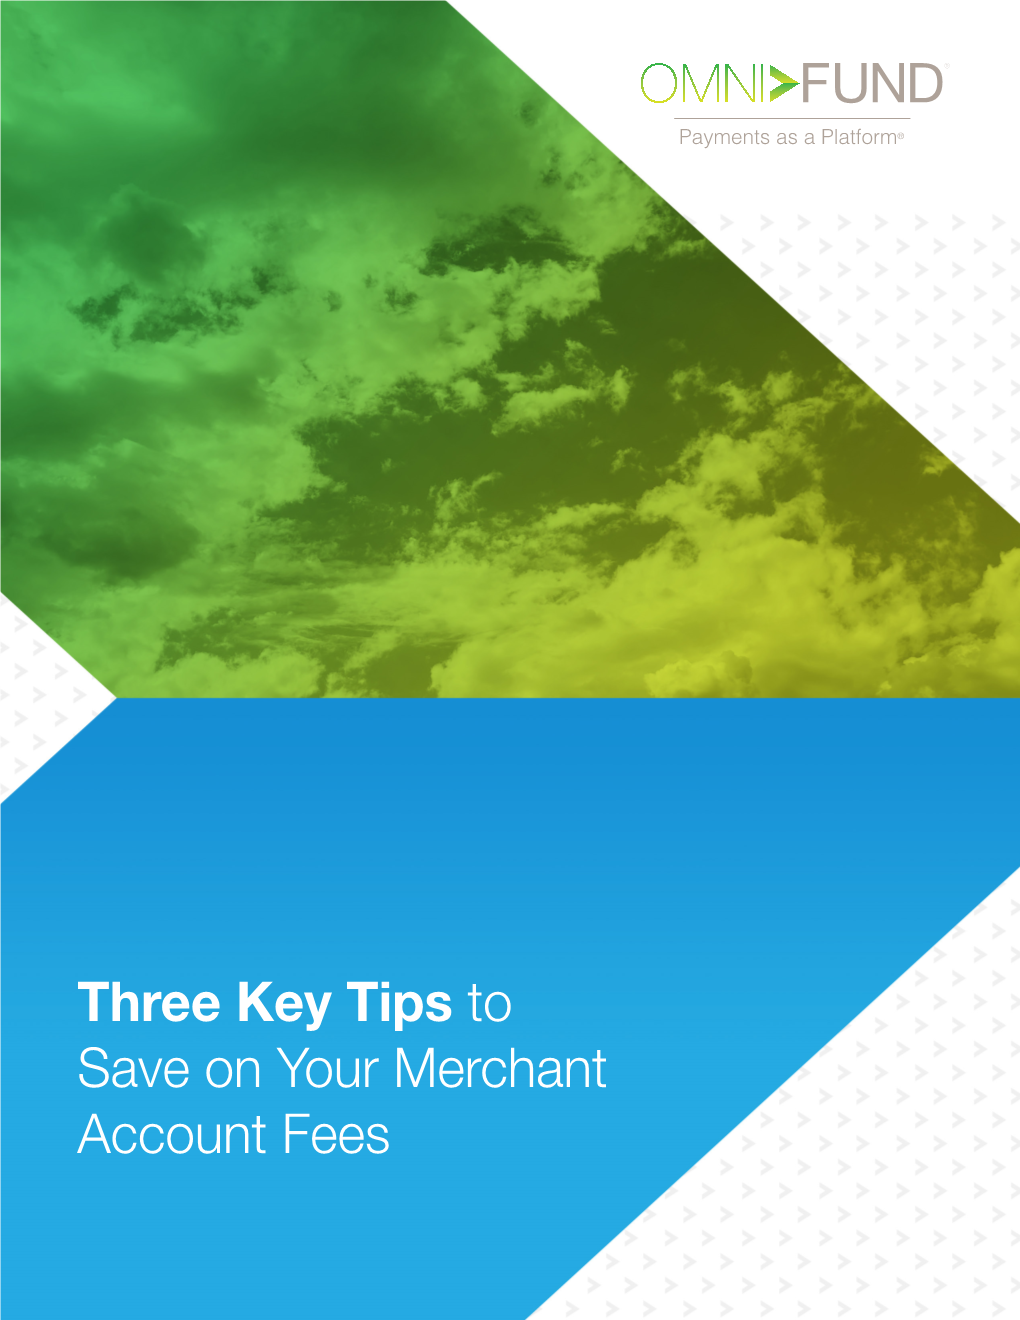 Three Key Tips to Save on Your Merchant Account Fees in This Digital Economy, Both Consumers and Businesses Most Often Prefer to Pay by Credit Card